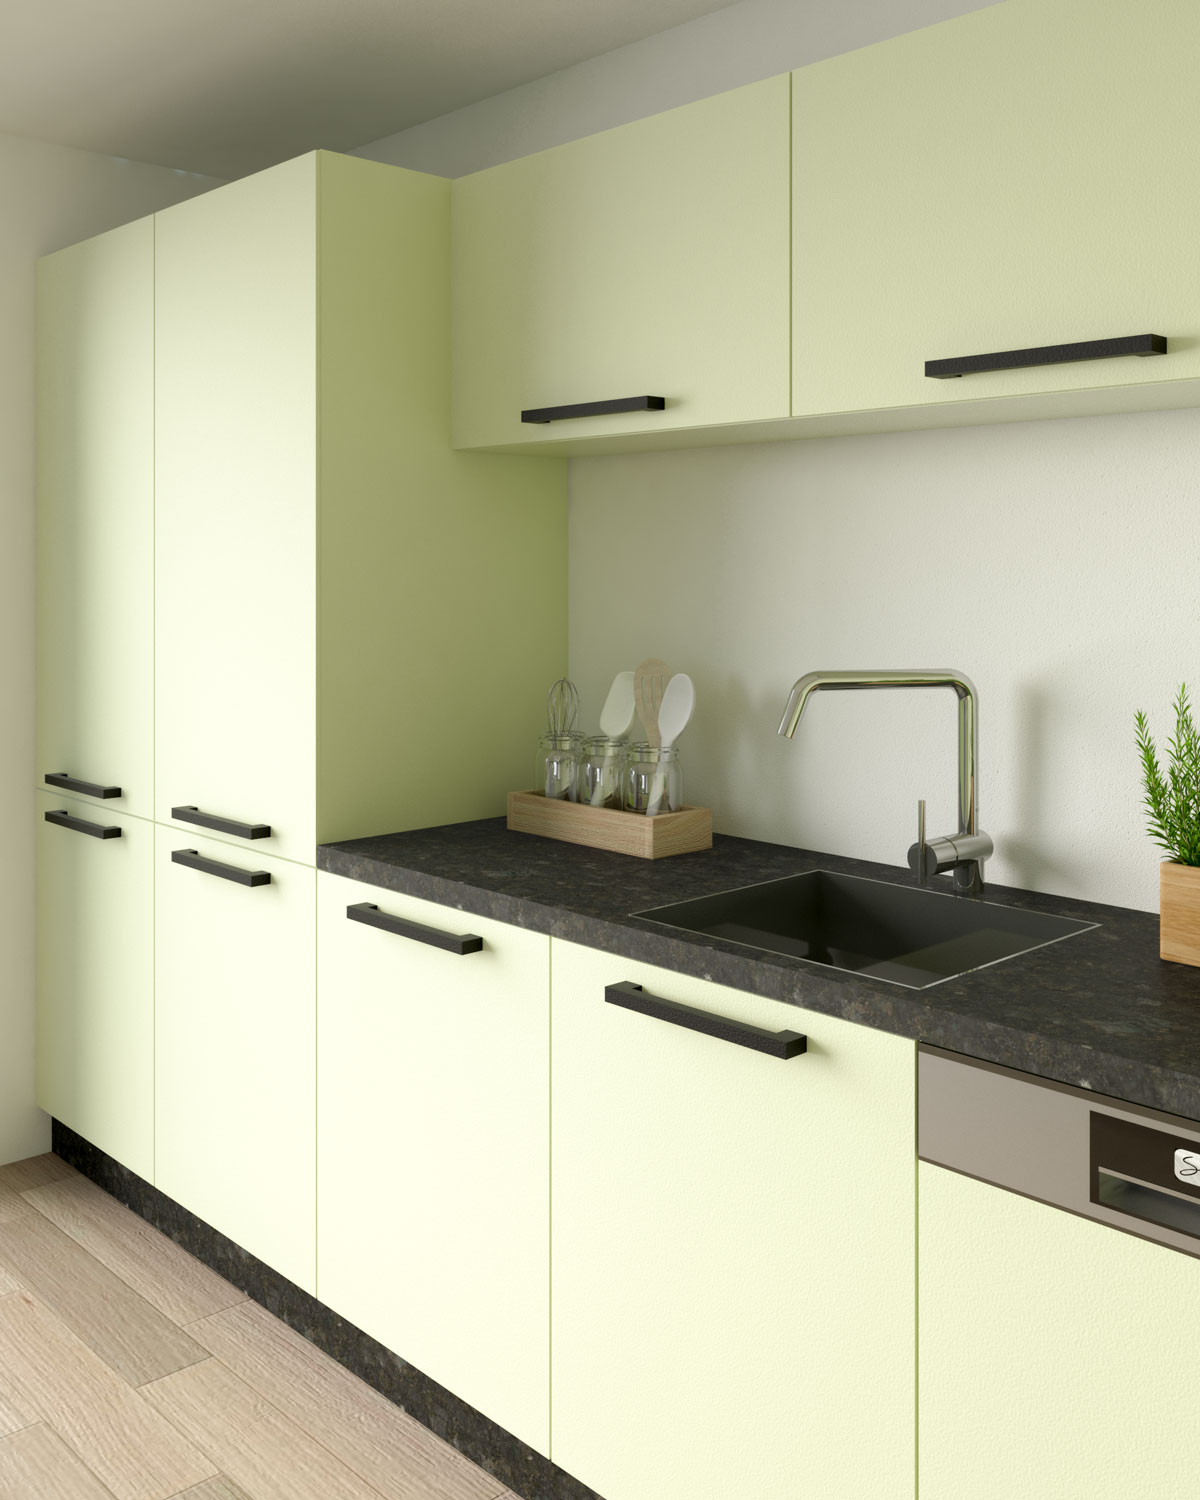 Sour apple kitchen cabinets with black granite countertops